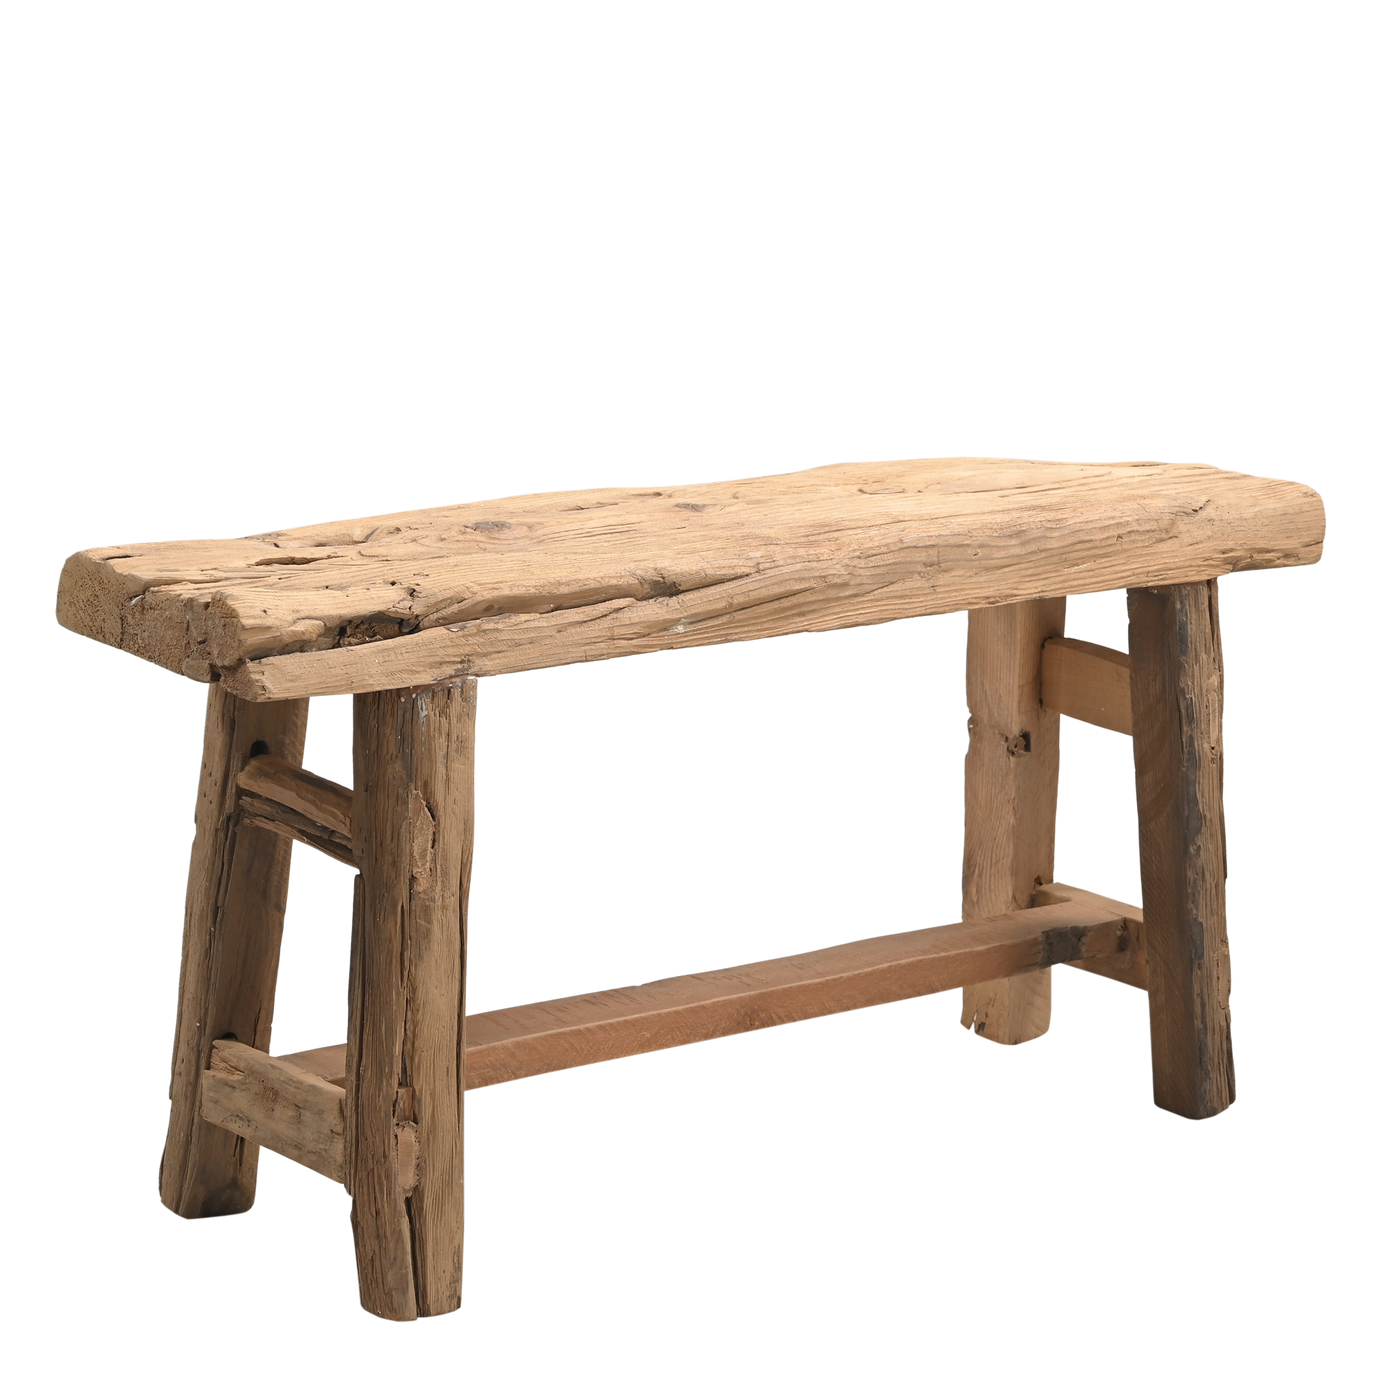 Chauki - Old wooden stool n°3